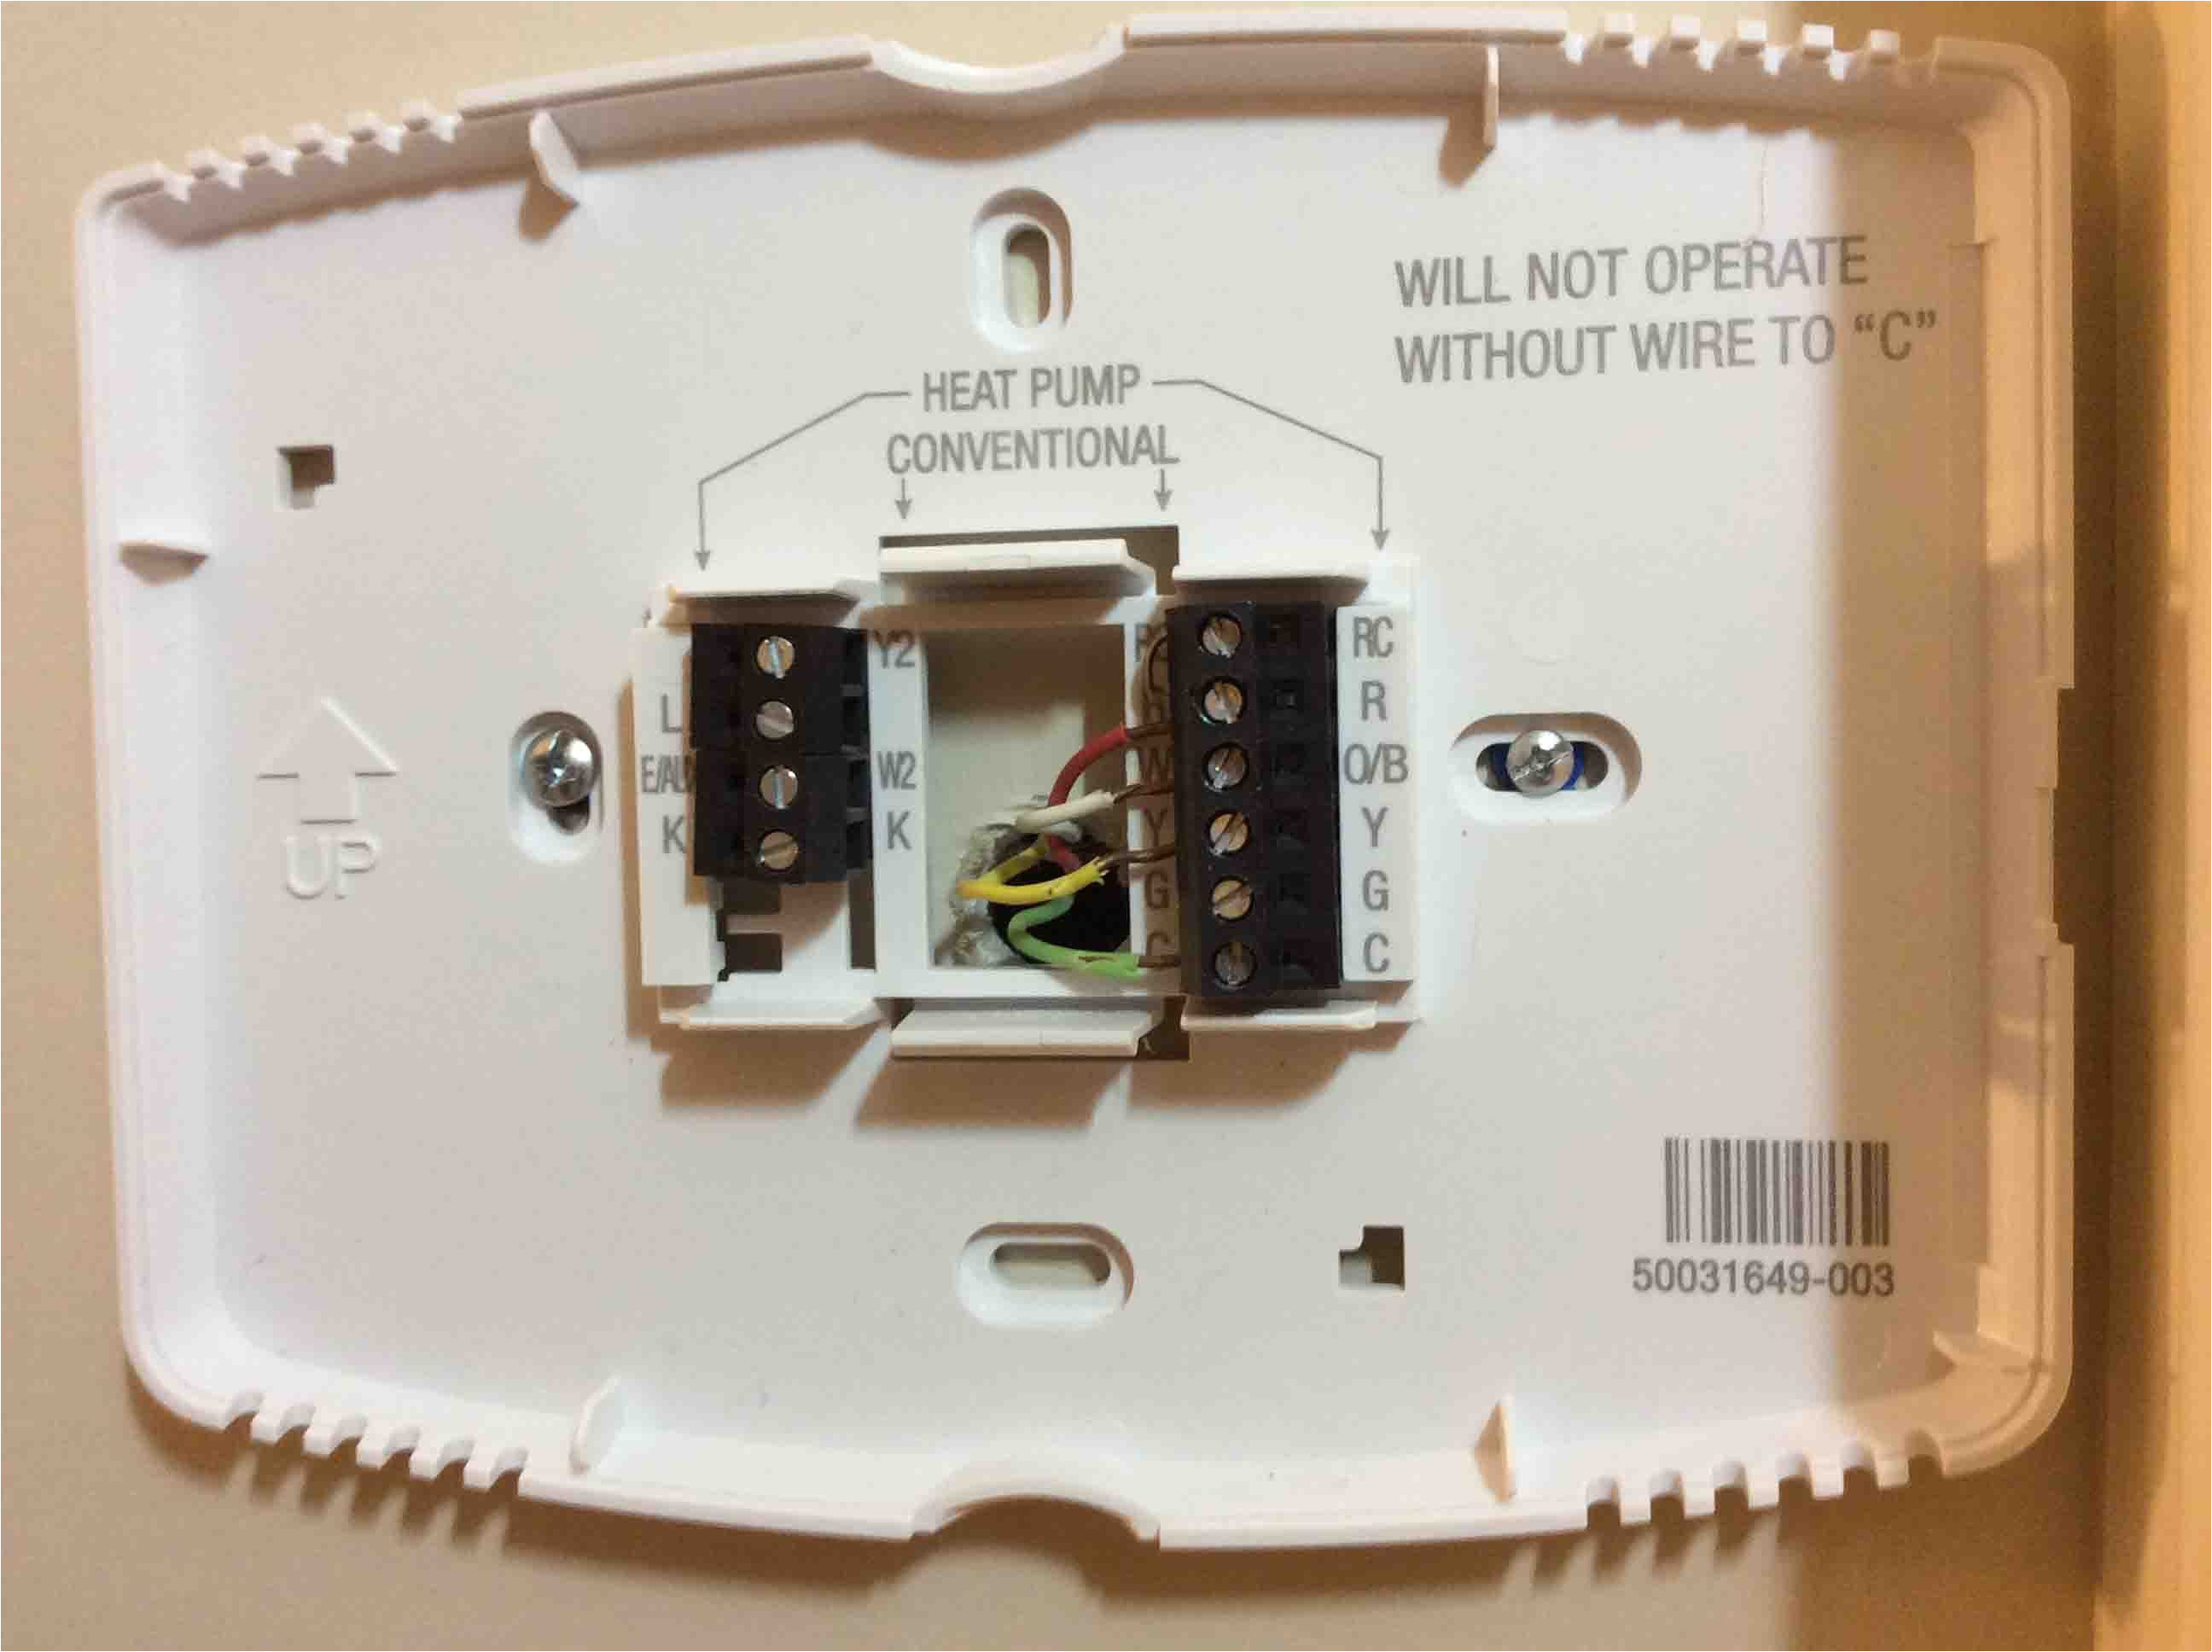 wiring diagram for honeywell thermostat valid honeywell thermostat rth2310b wiring diagram save honeywell